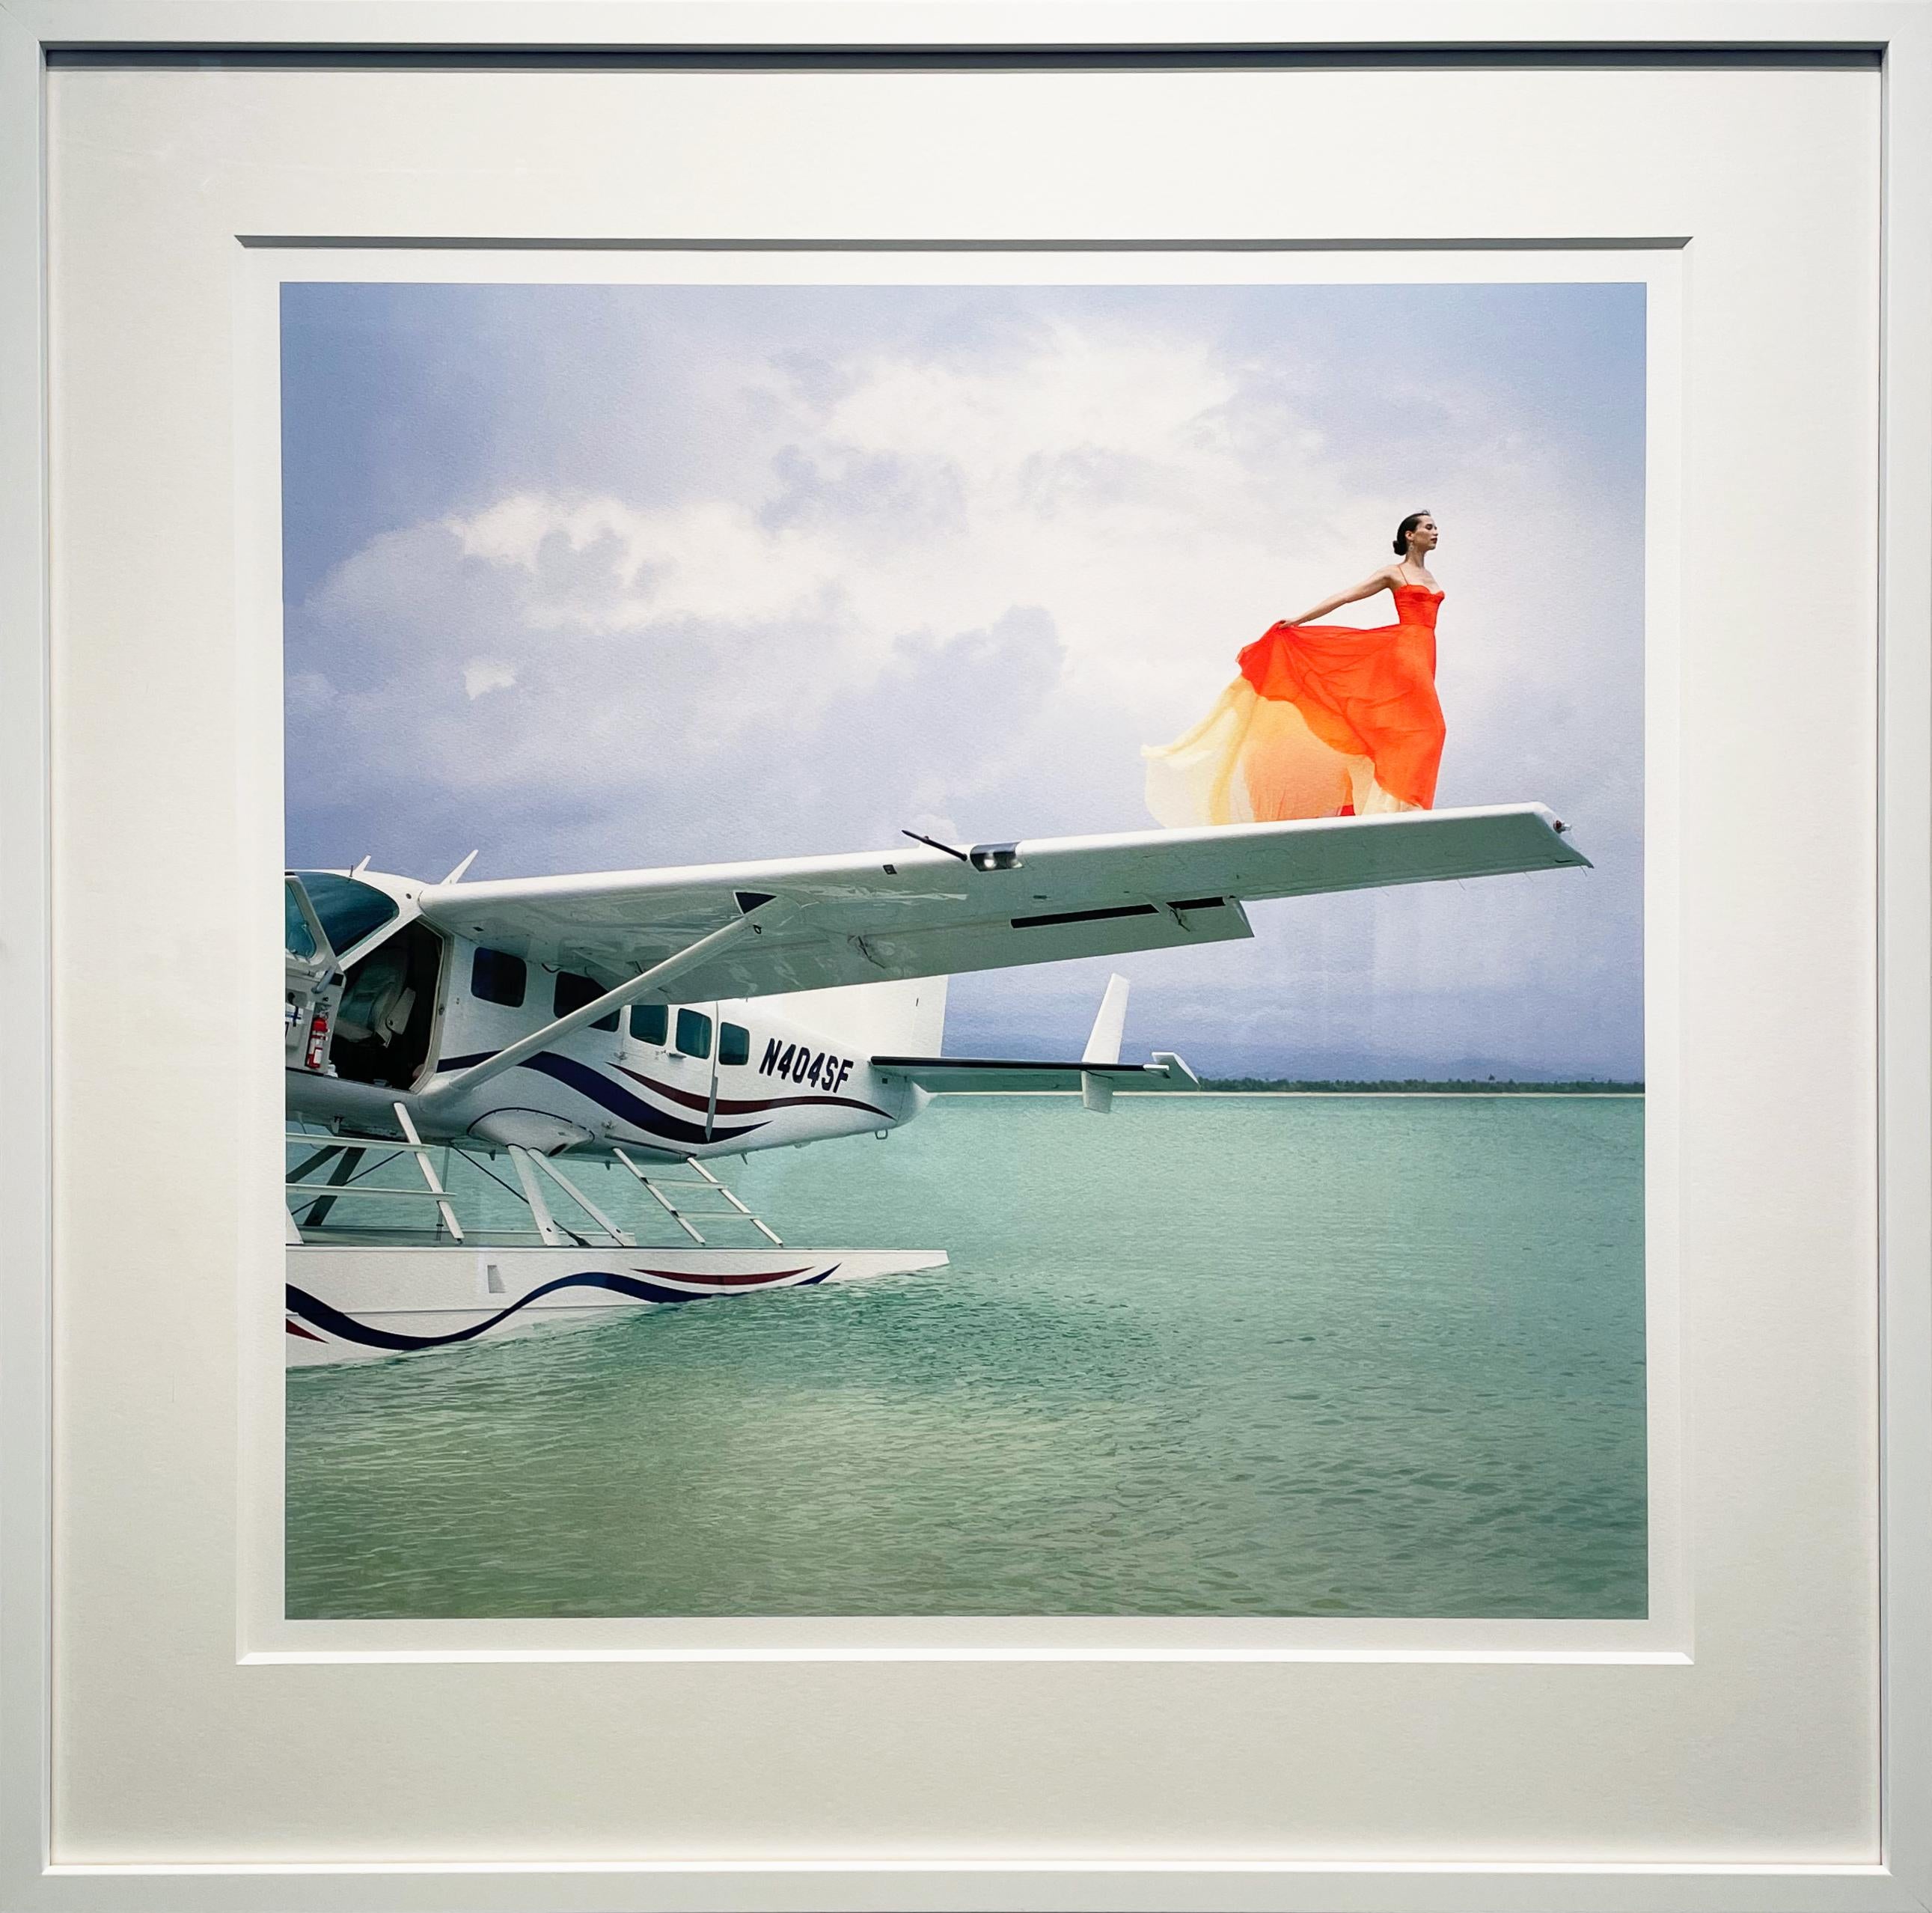 Saori on Sea Plane Wing No. 2, Dominican Republic - 28 x 28 inches framed - Photograph by Rodney Smith